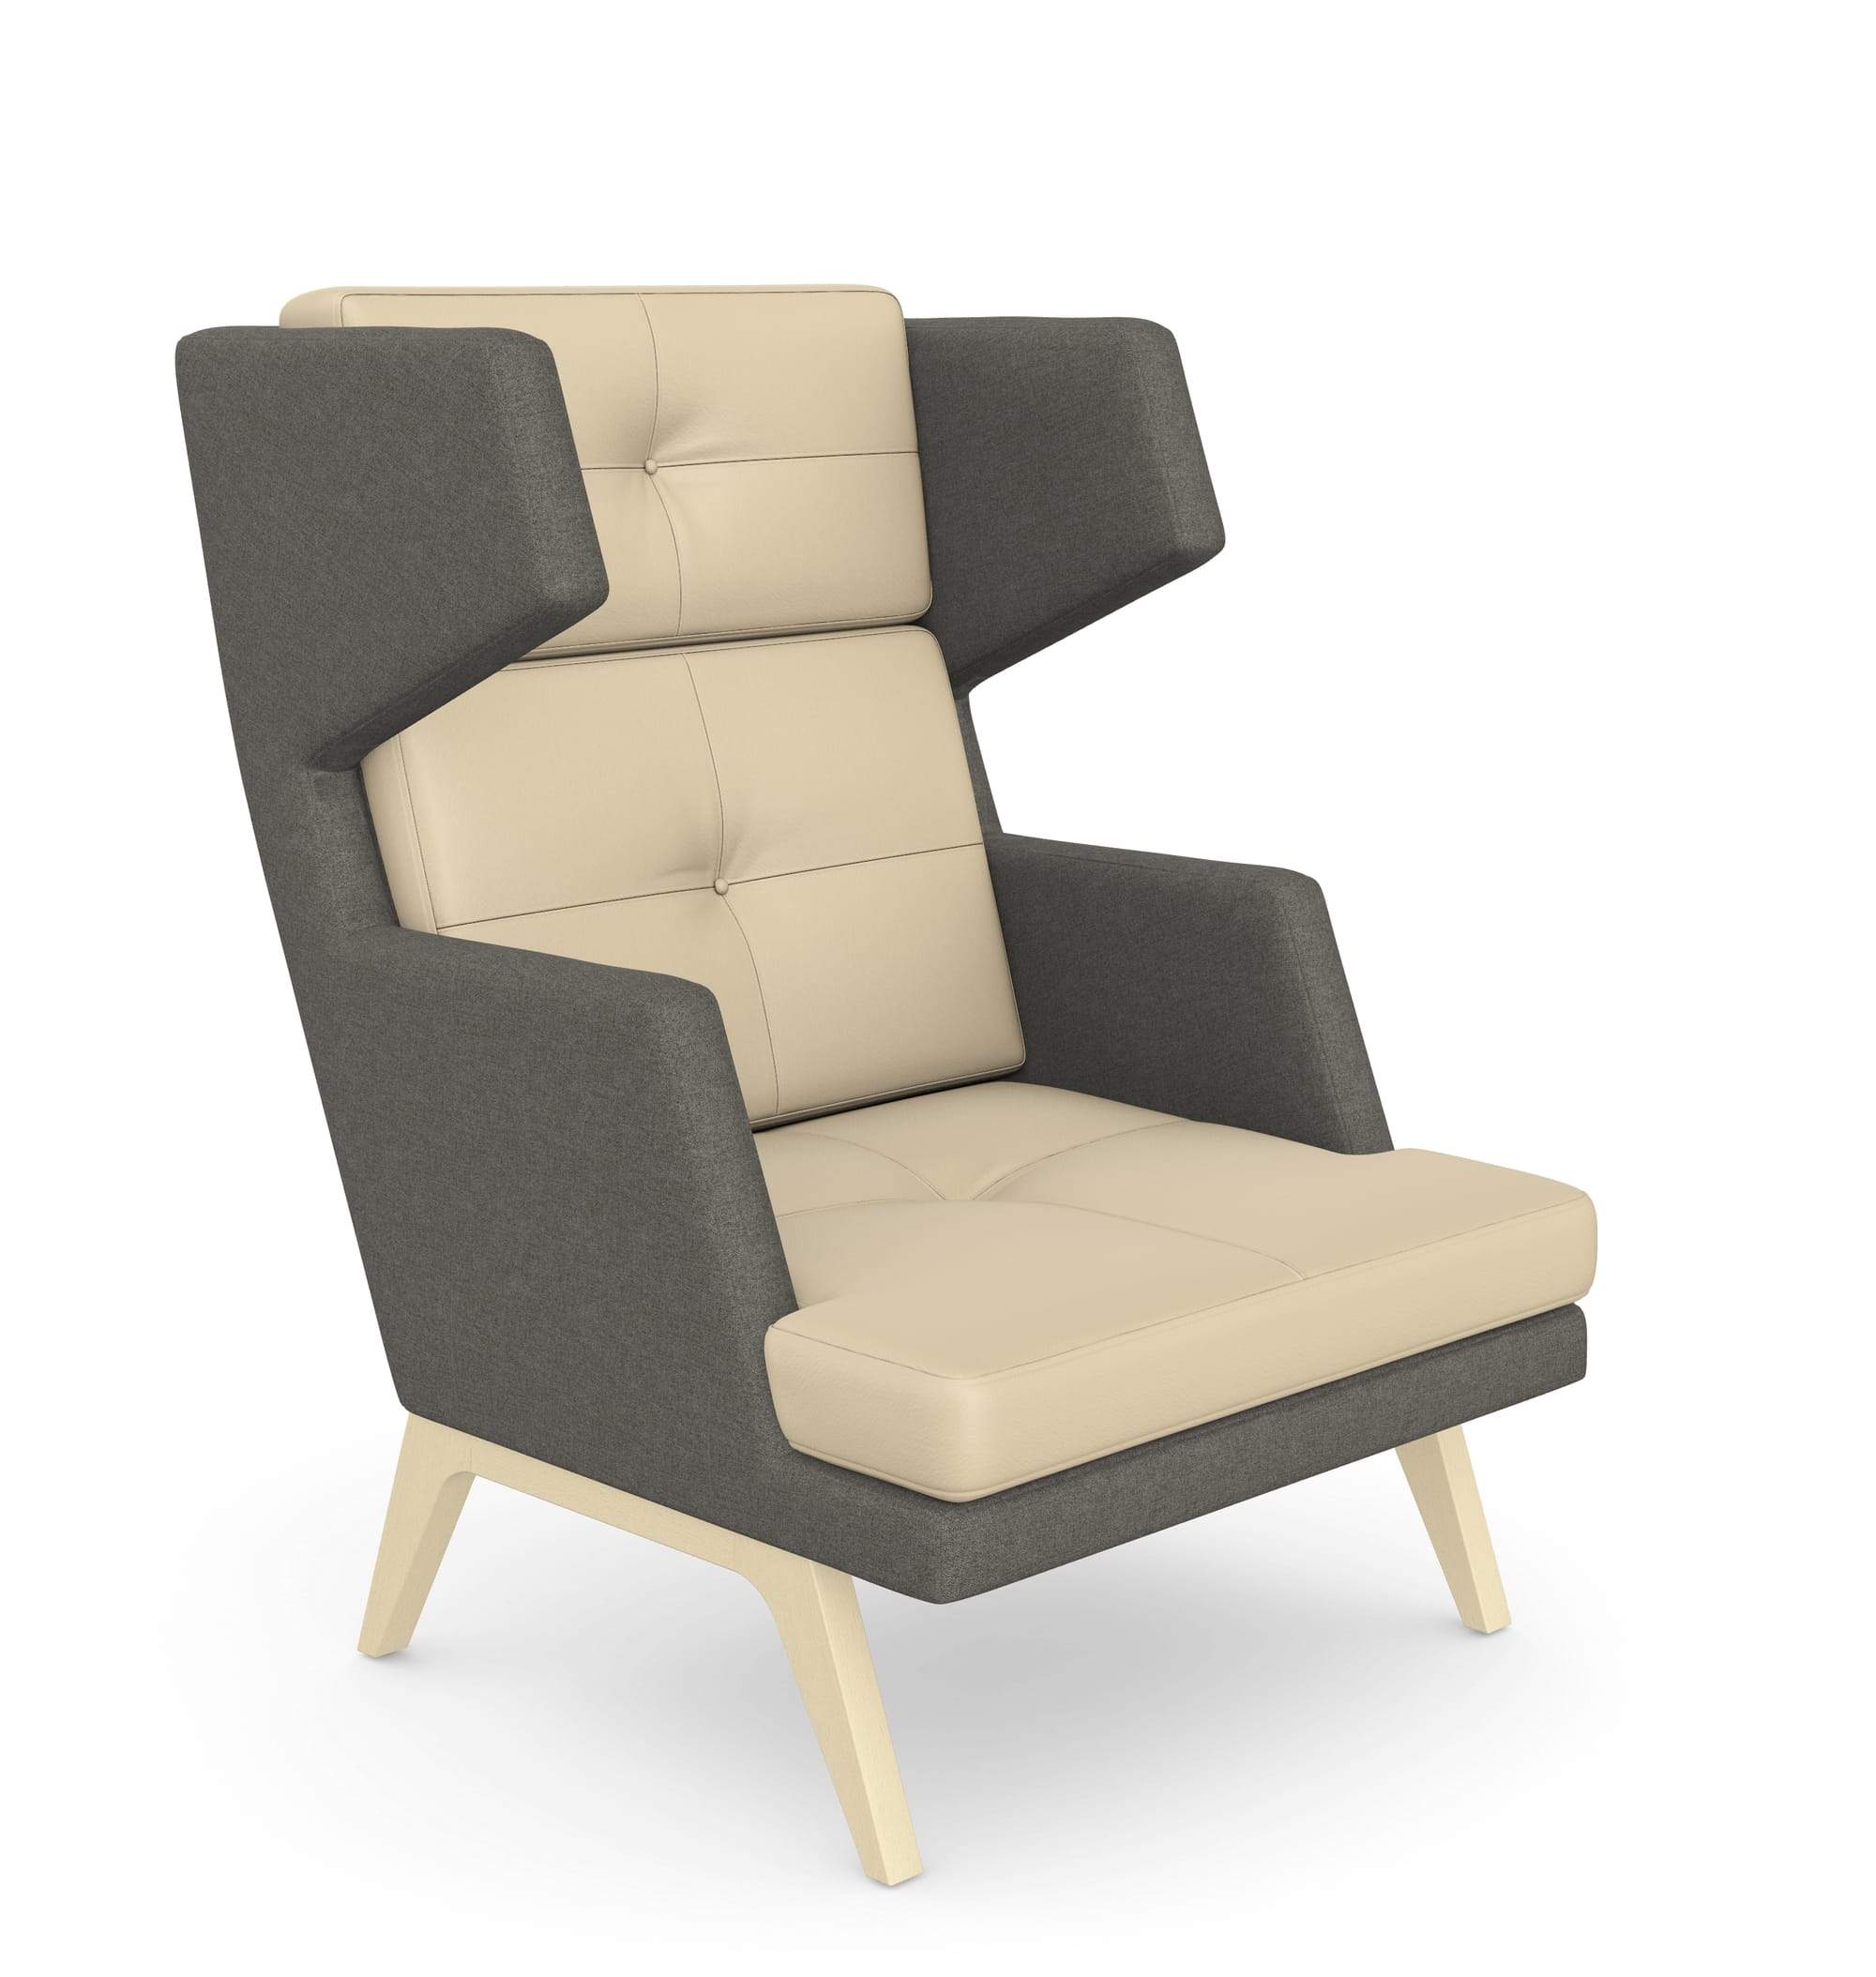 October Armchair with High Backrest